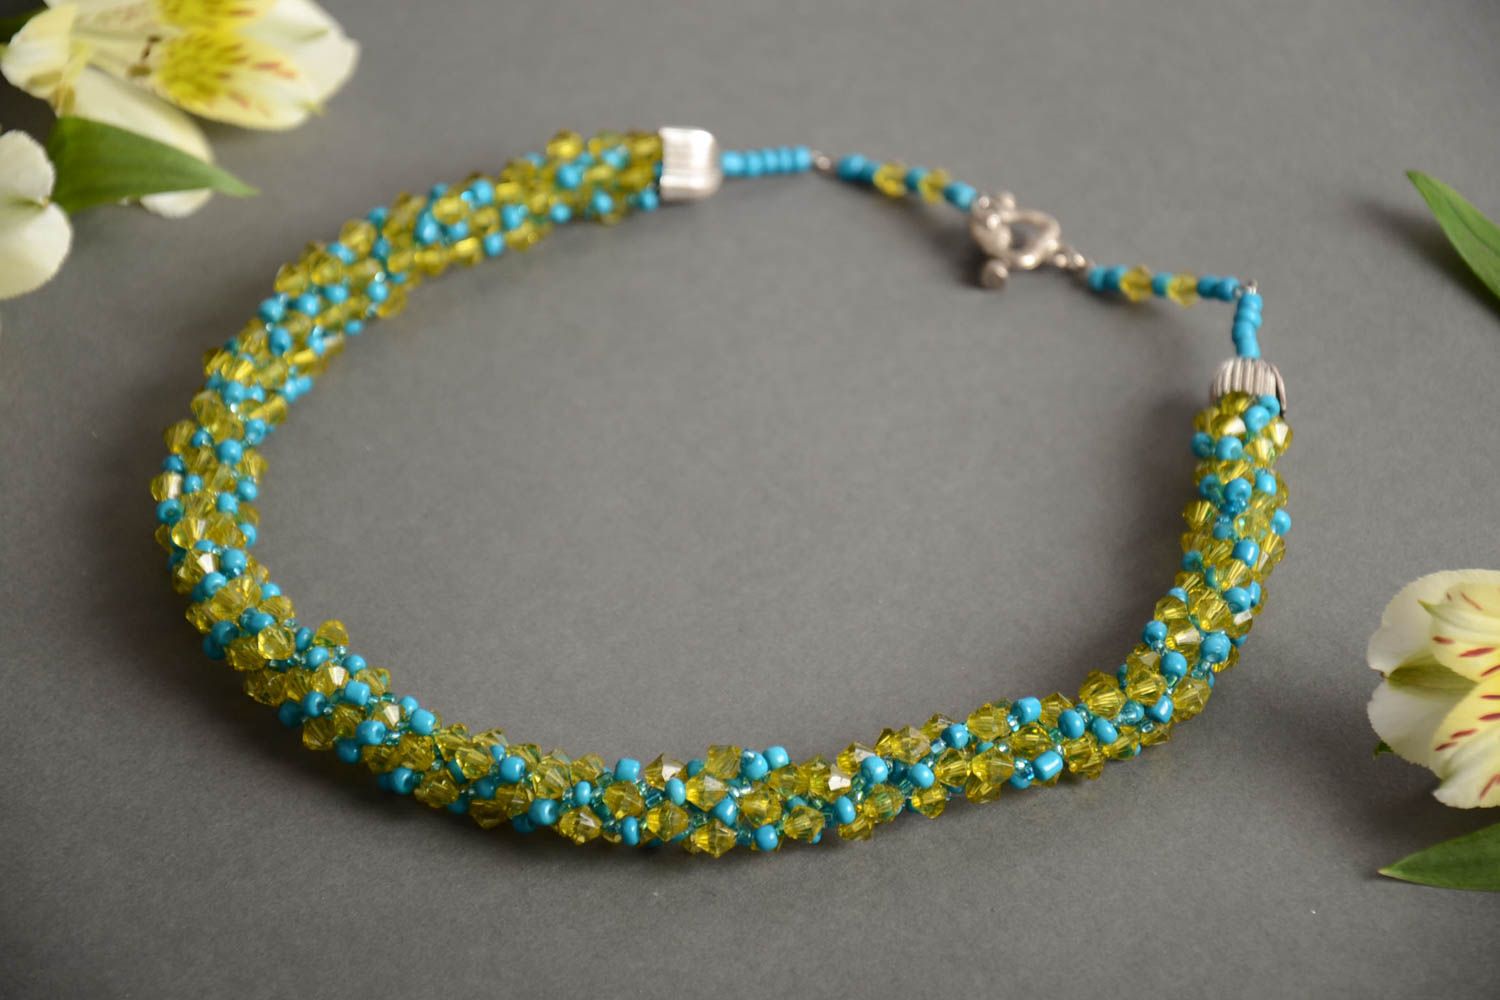 Handmade thin necklace crocheted of Czech beads in blue and yellow colors photo 1